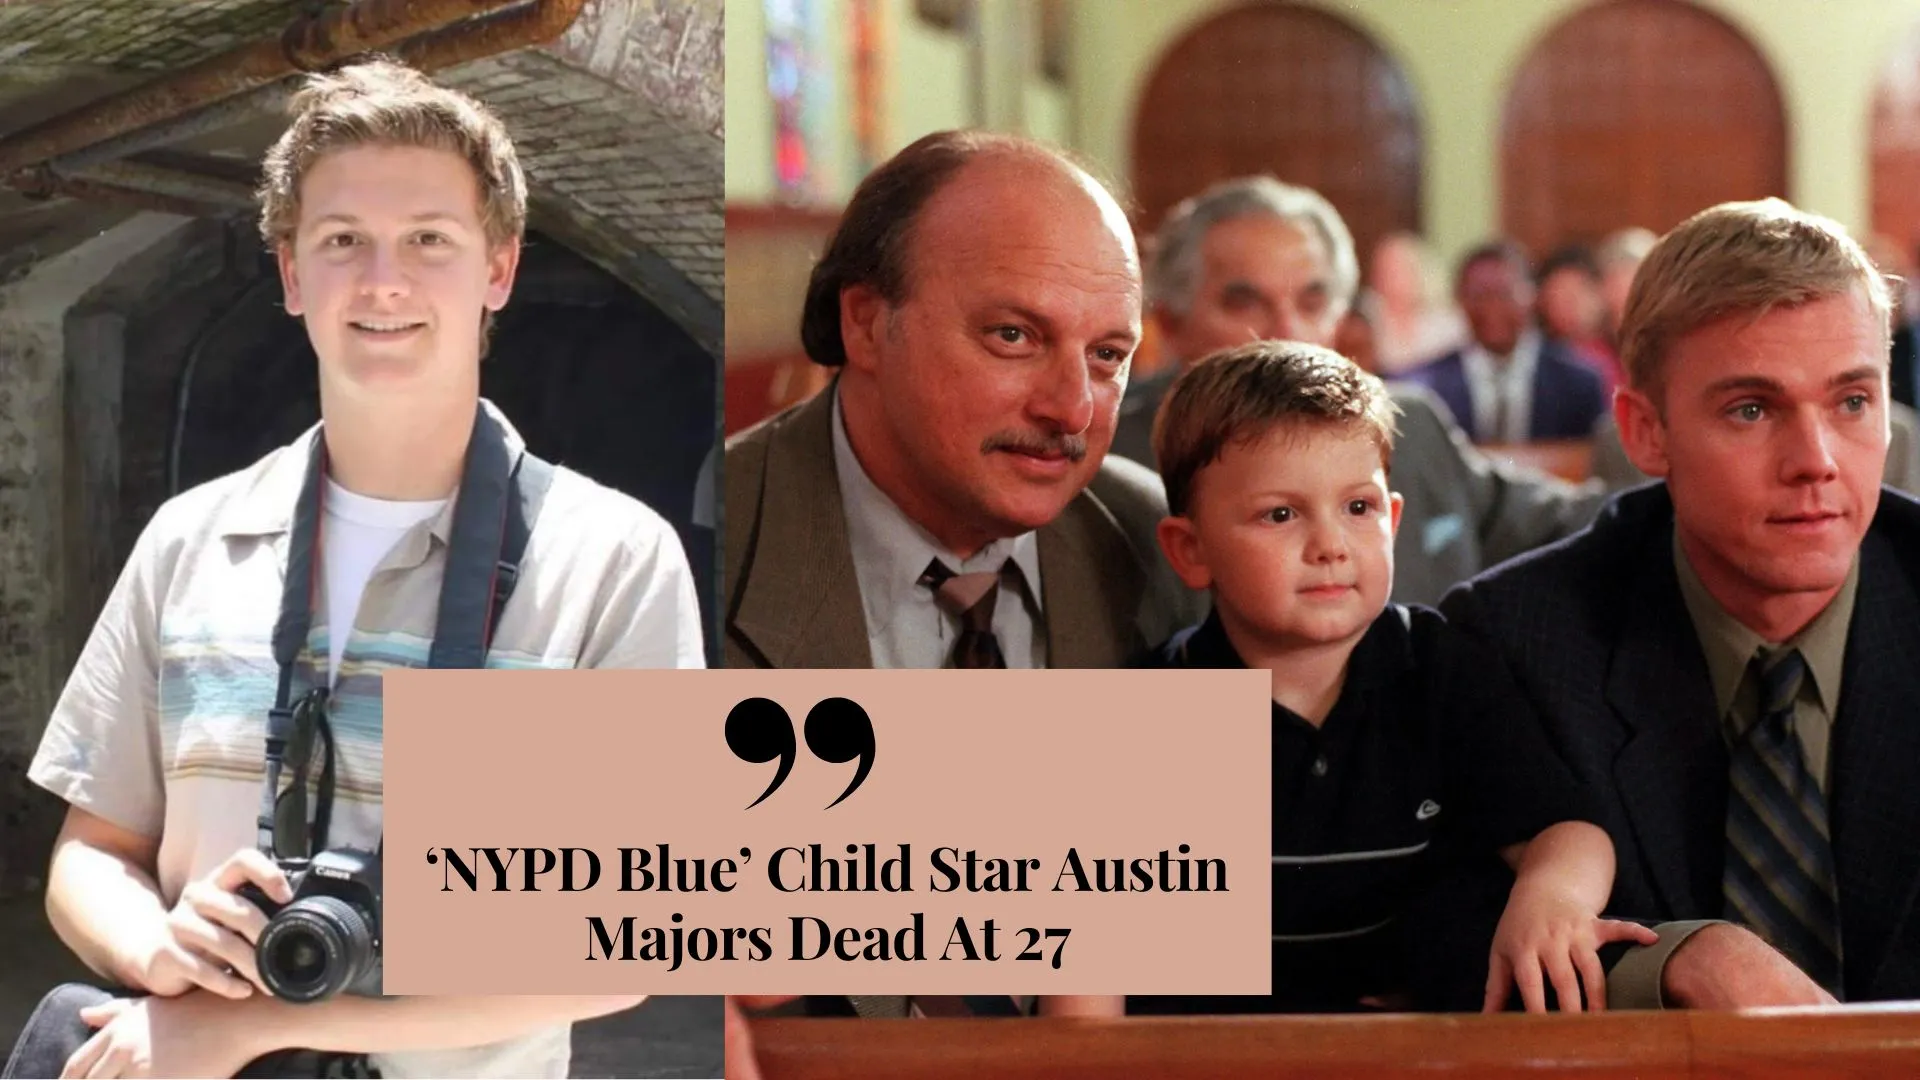 ‘NYPD Blue’ Child Star Austin Majors Dead At 27 (Image credit: Yahoo)